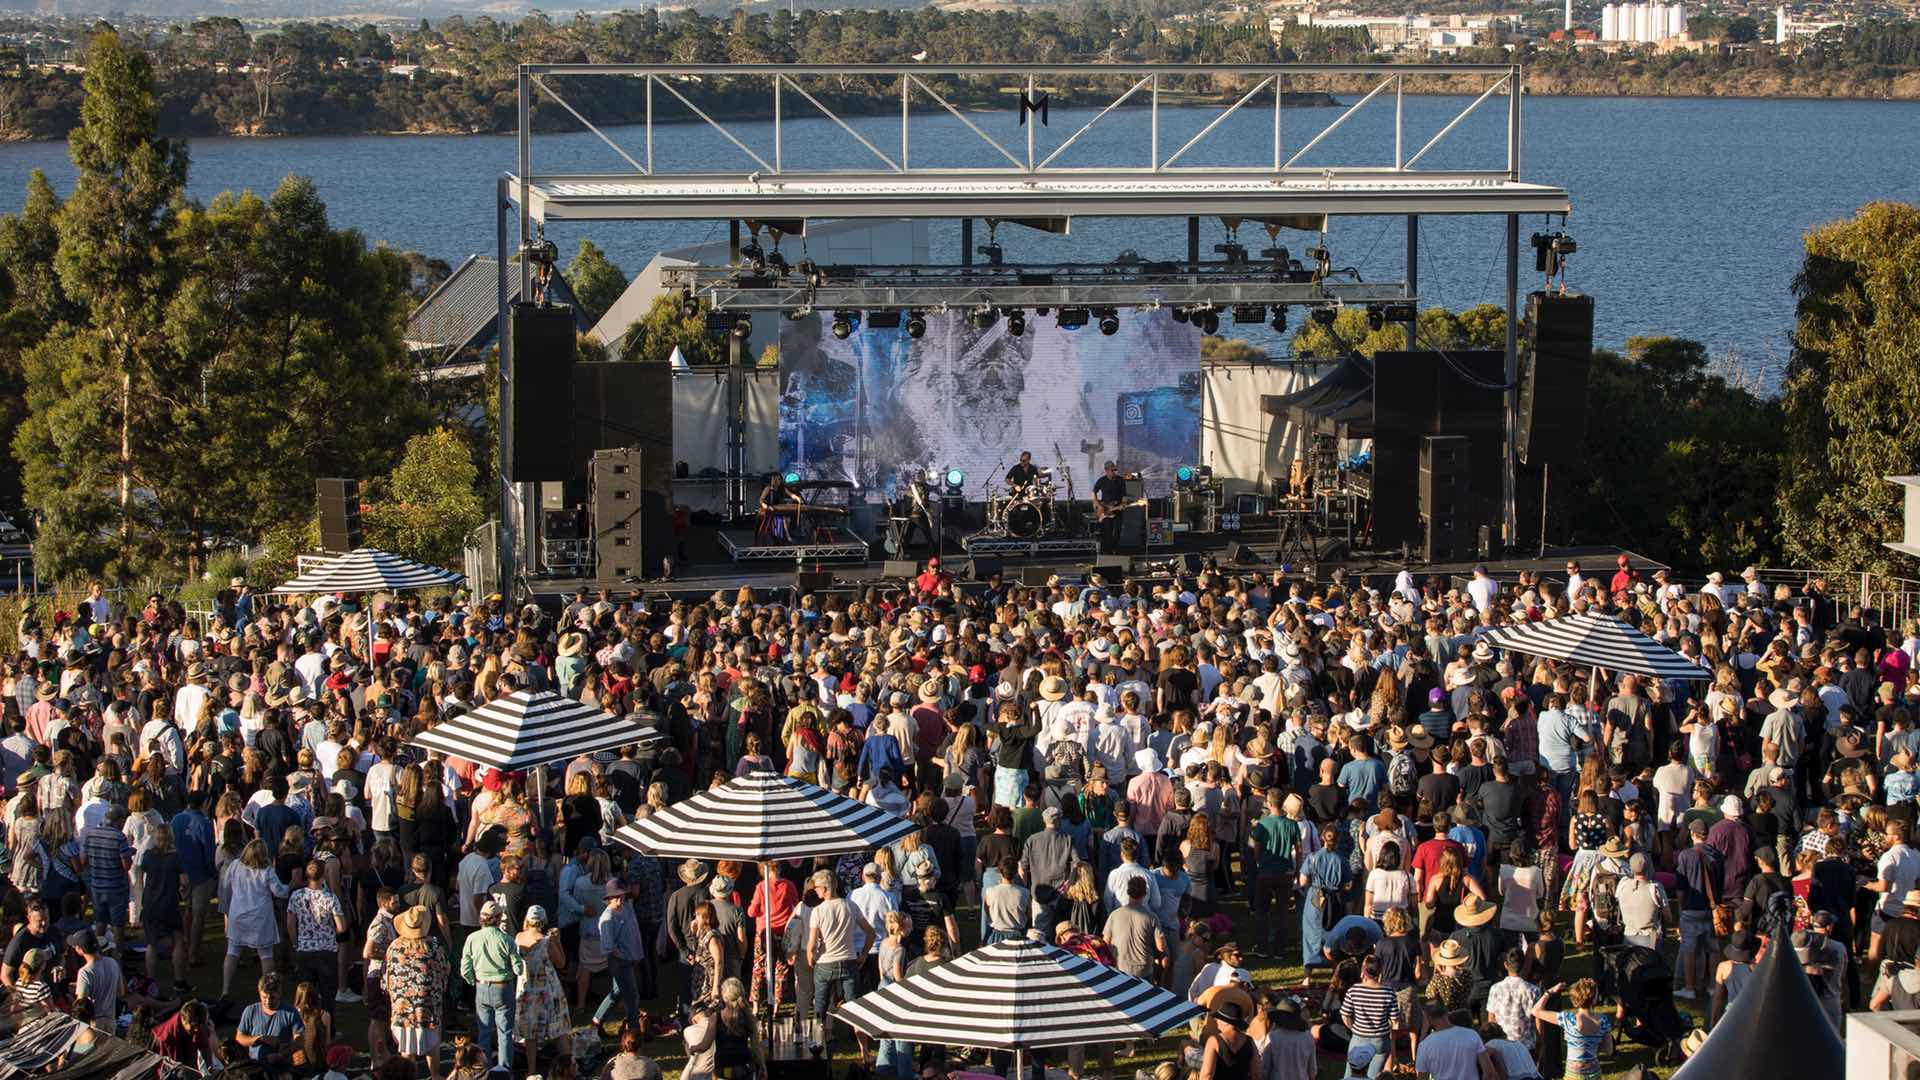 Mona Foma Announces a Supercharged Twin-City Tasmanian Lineup for 2018